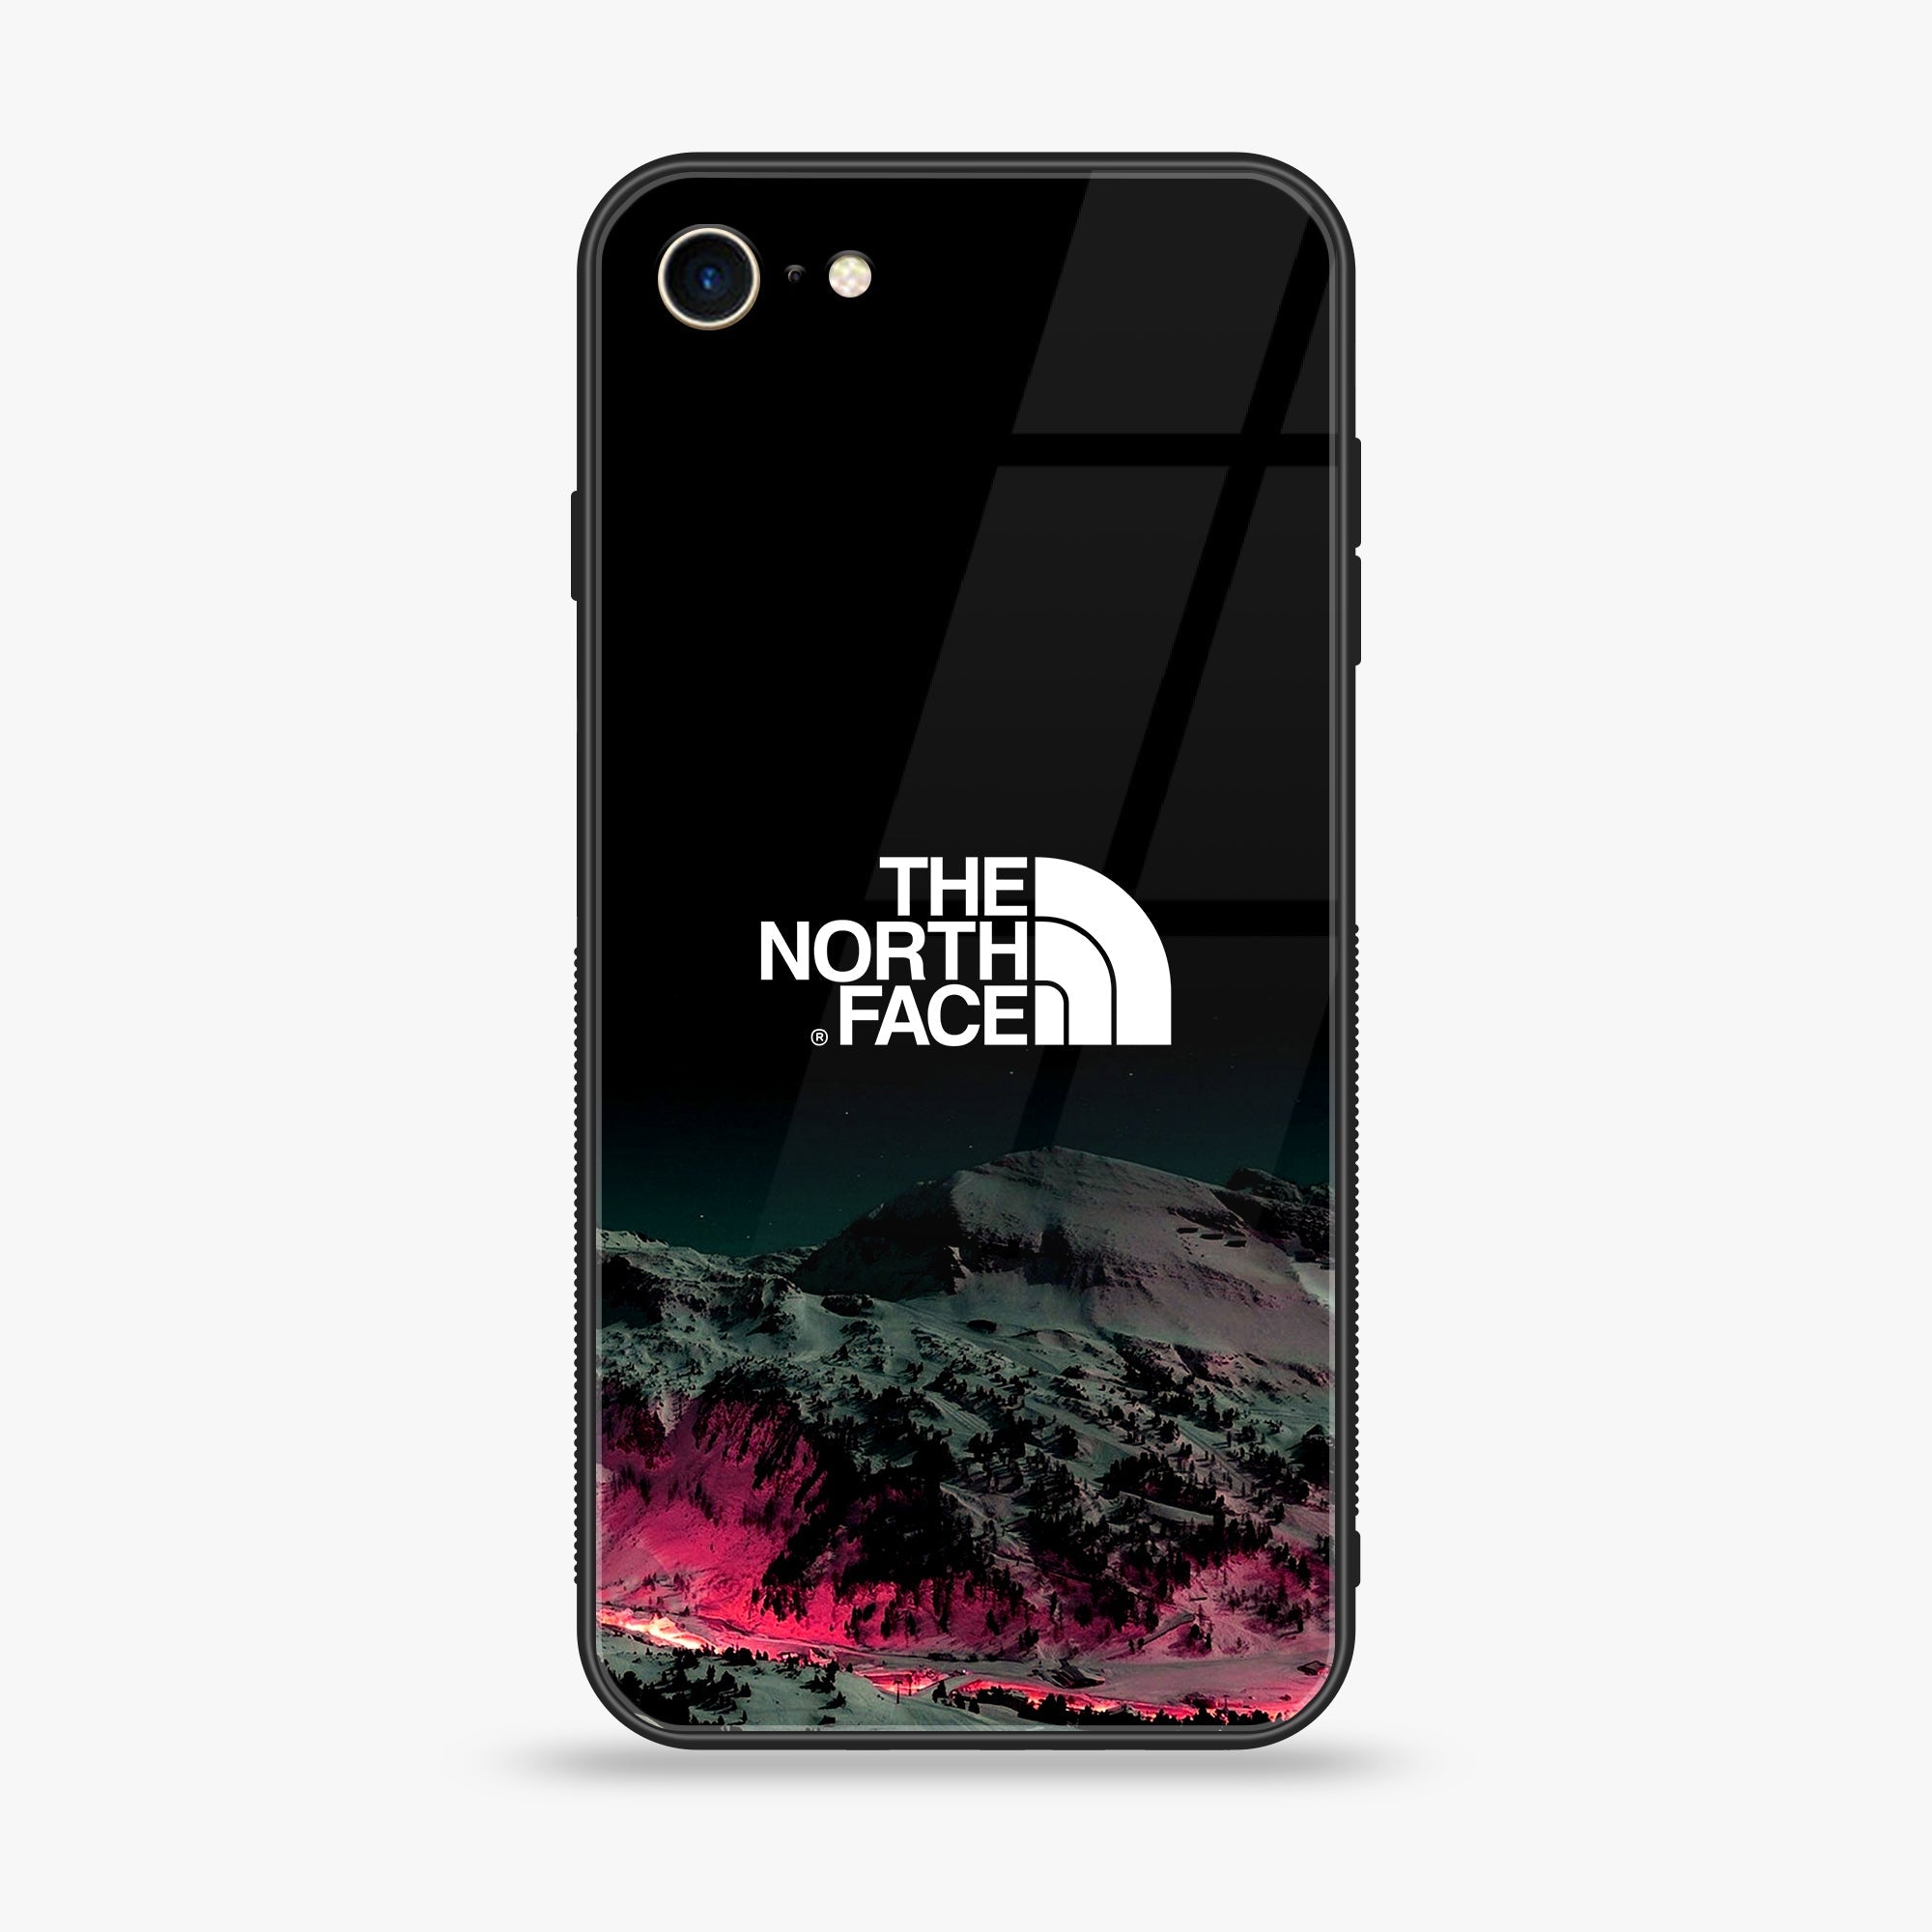 iPhone 8 - The North Face Series - Premium Printed Glass soft Bumper shock Proof Case